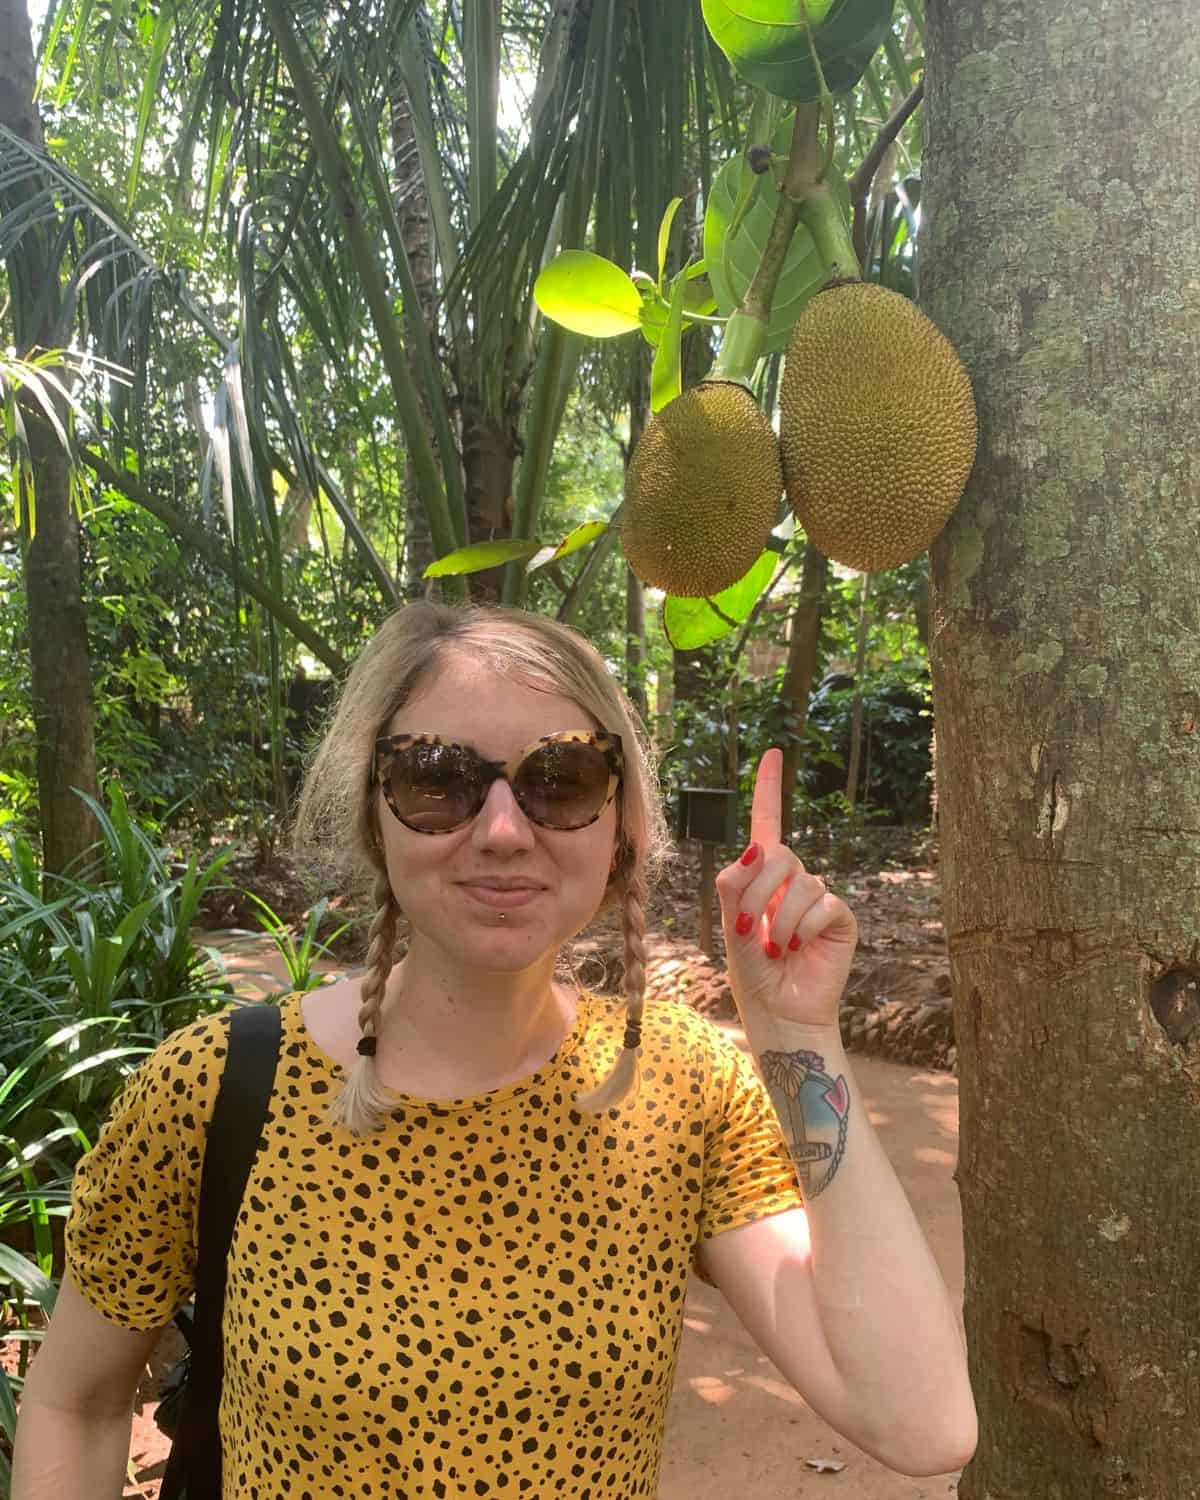 Jess pointing at two jackfruits growing on a tree.